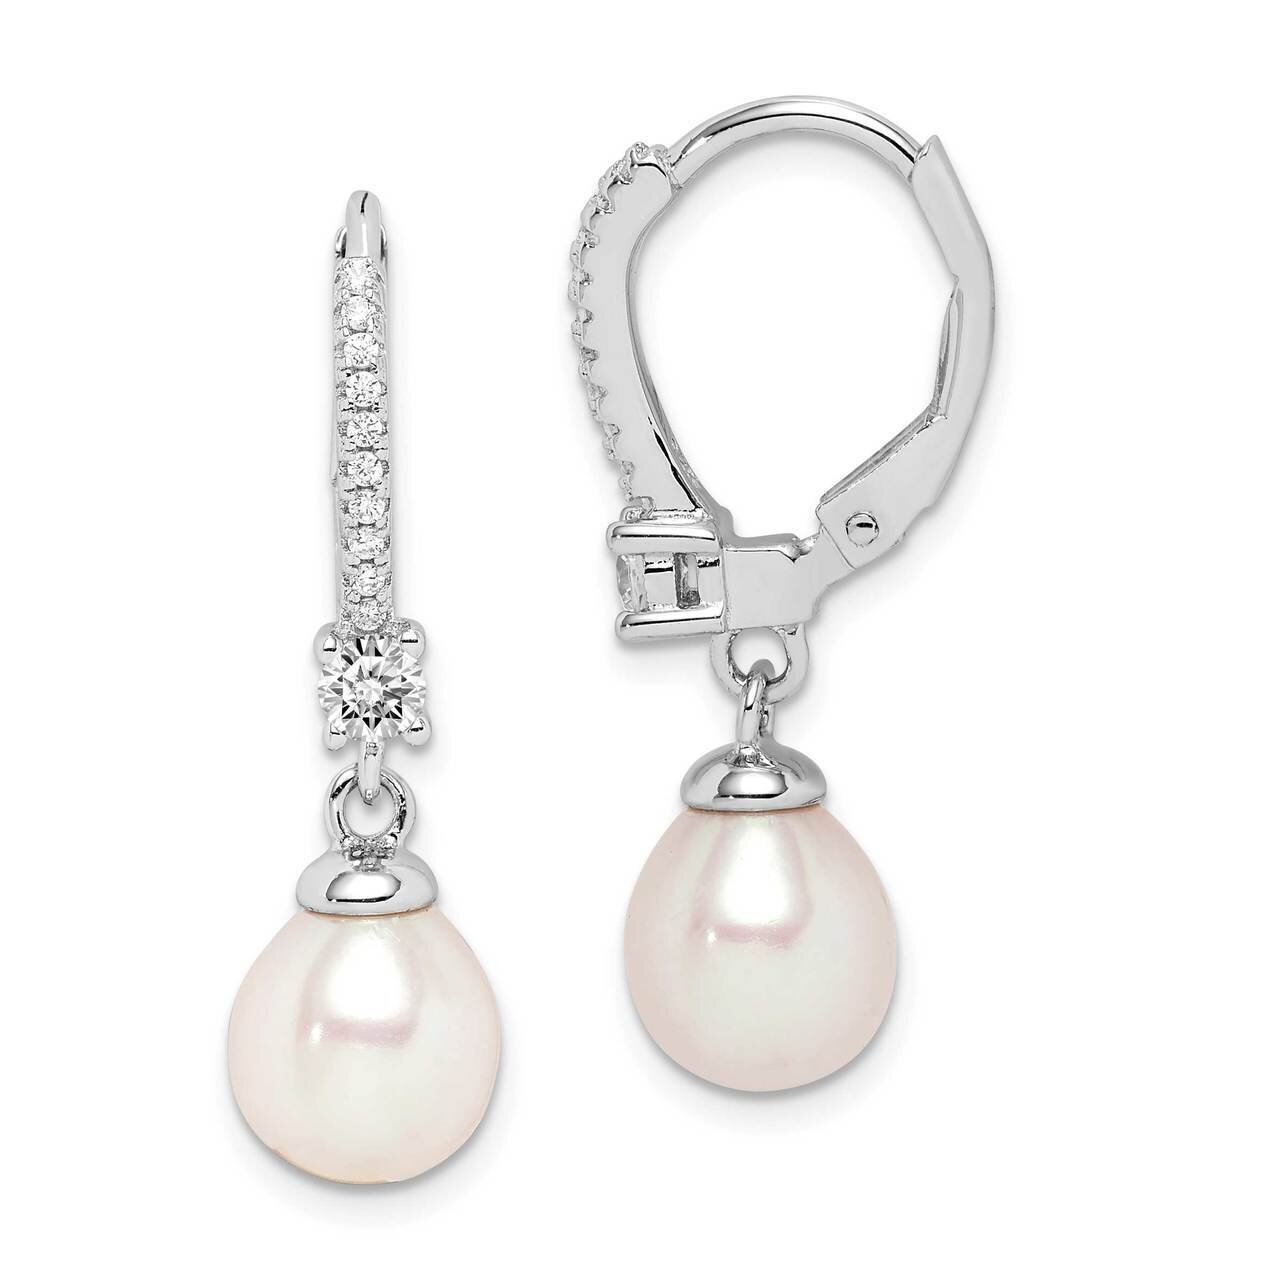 7-8mm White Rice Freshwater Cultured Pearl CZ Diamond Earrings Sterling Silver Rhodium Plated QE15201